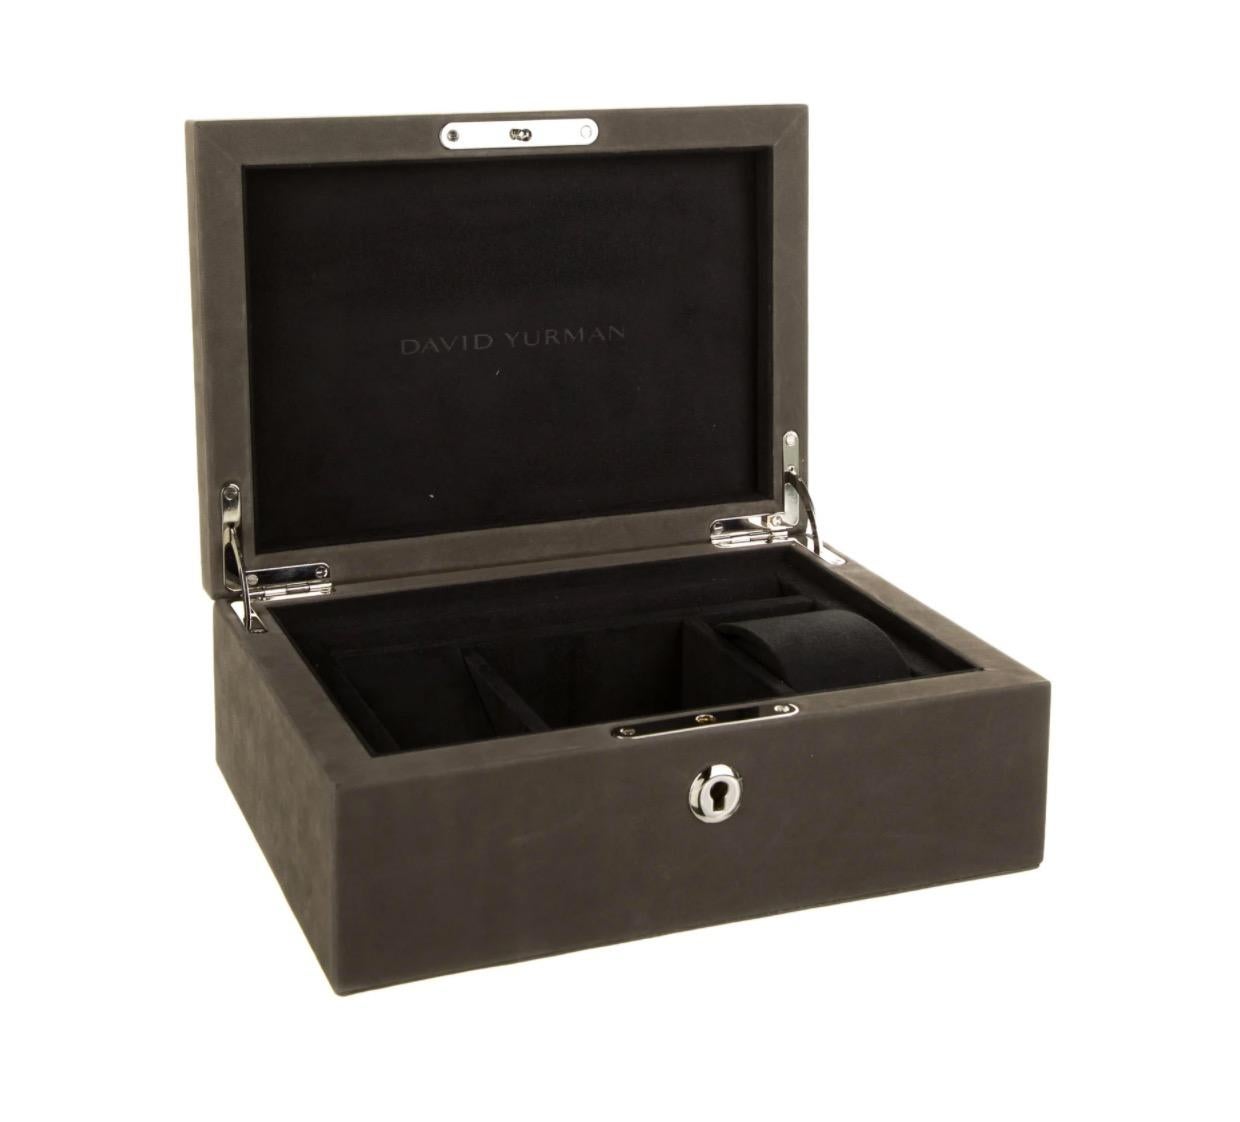 Suede 
Metal
Silver tone hardware 
Suede lining
Features four interior compartments
Measures 9.75